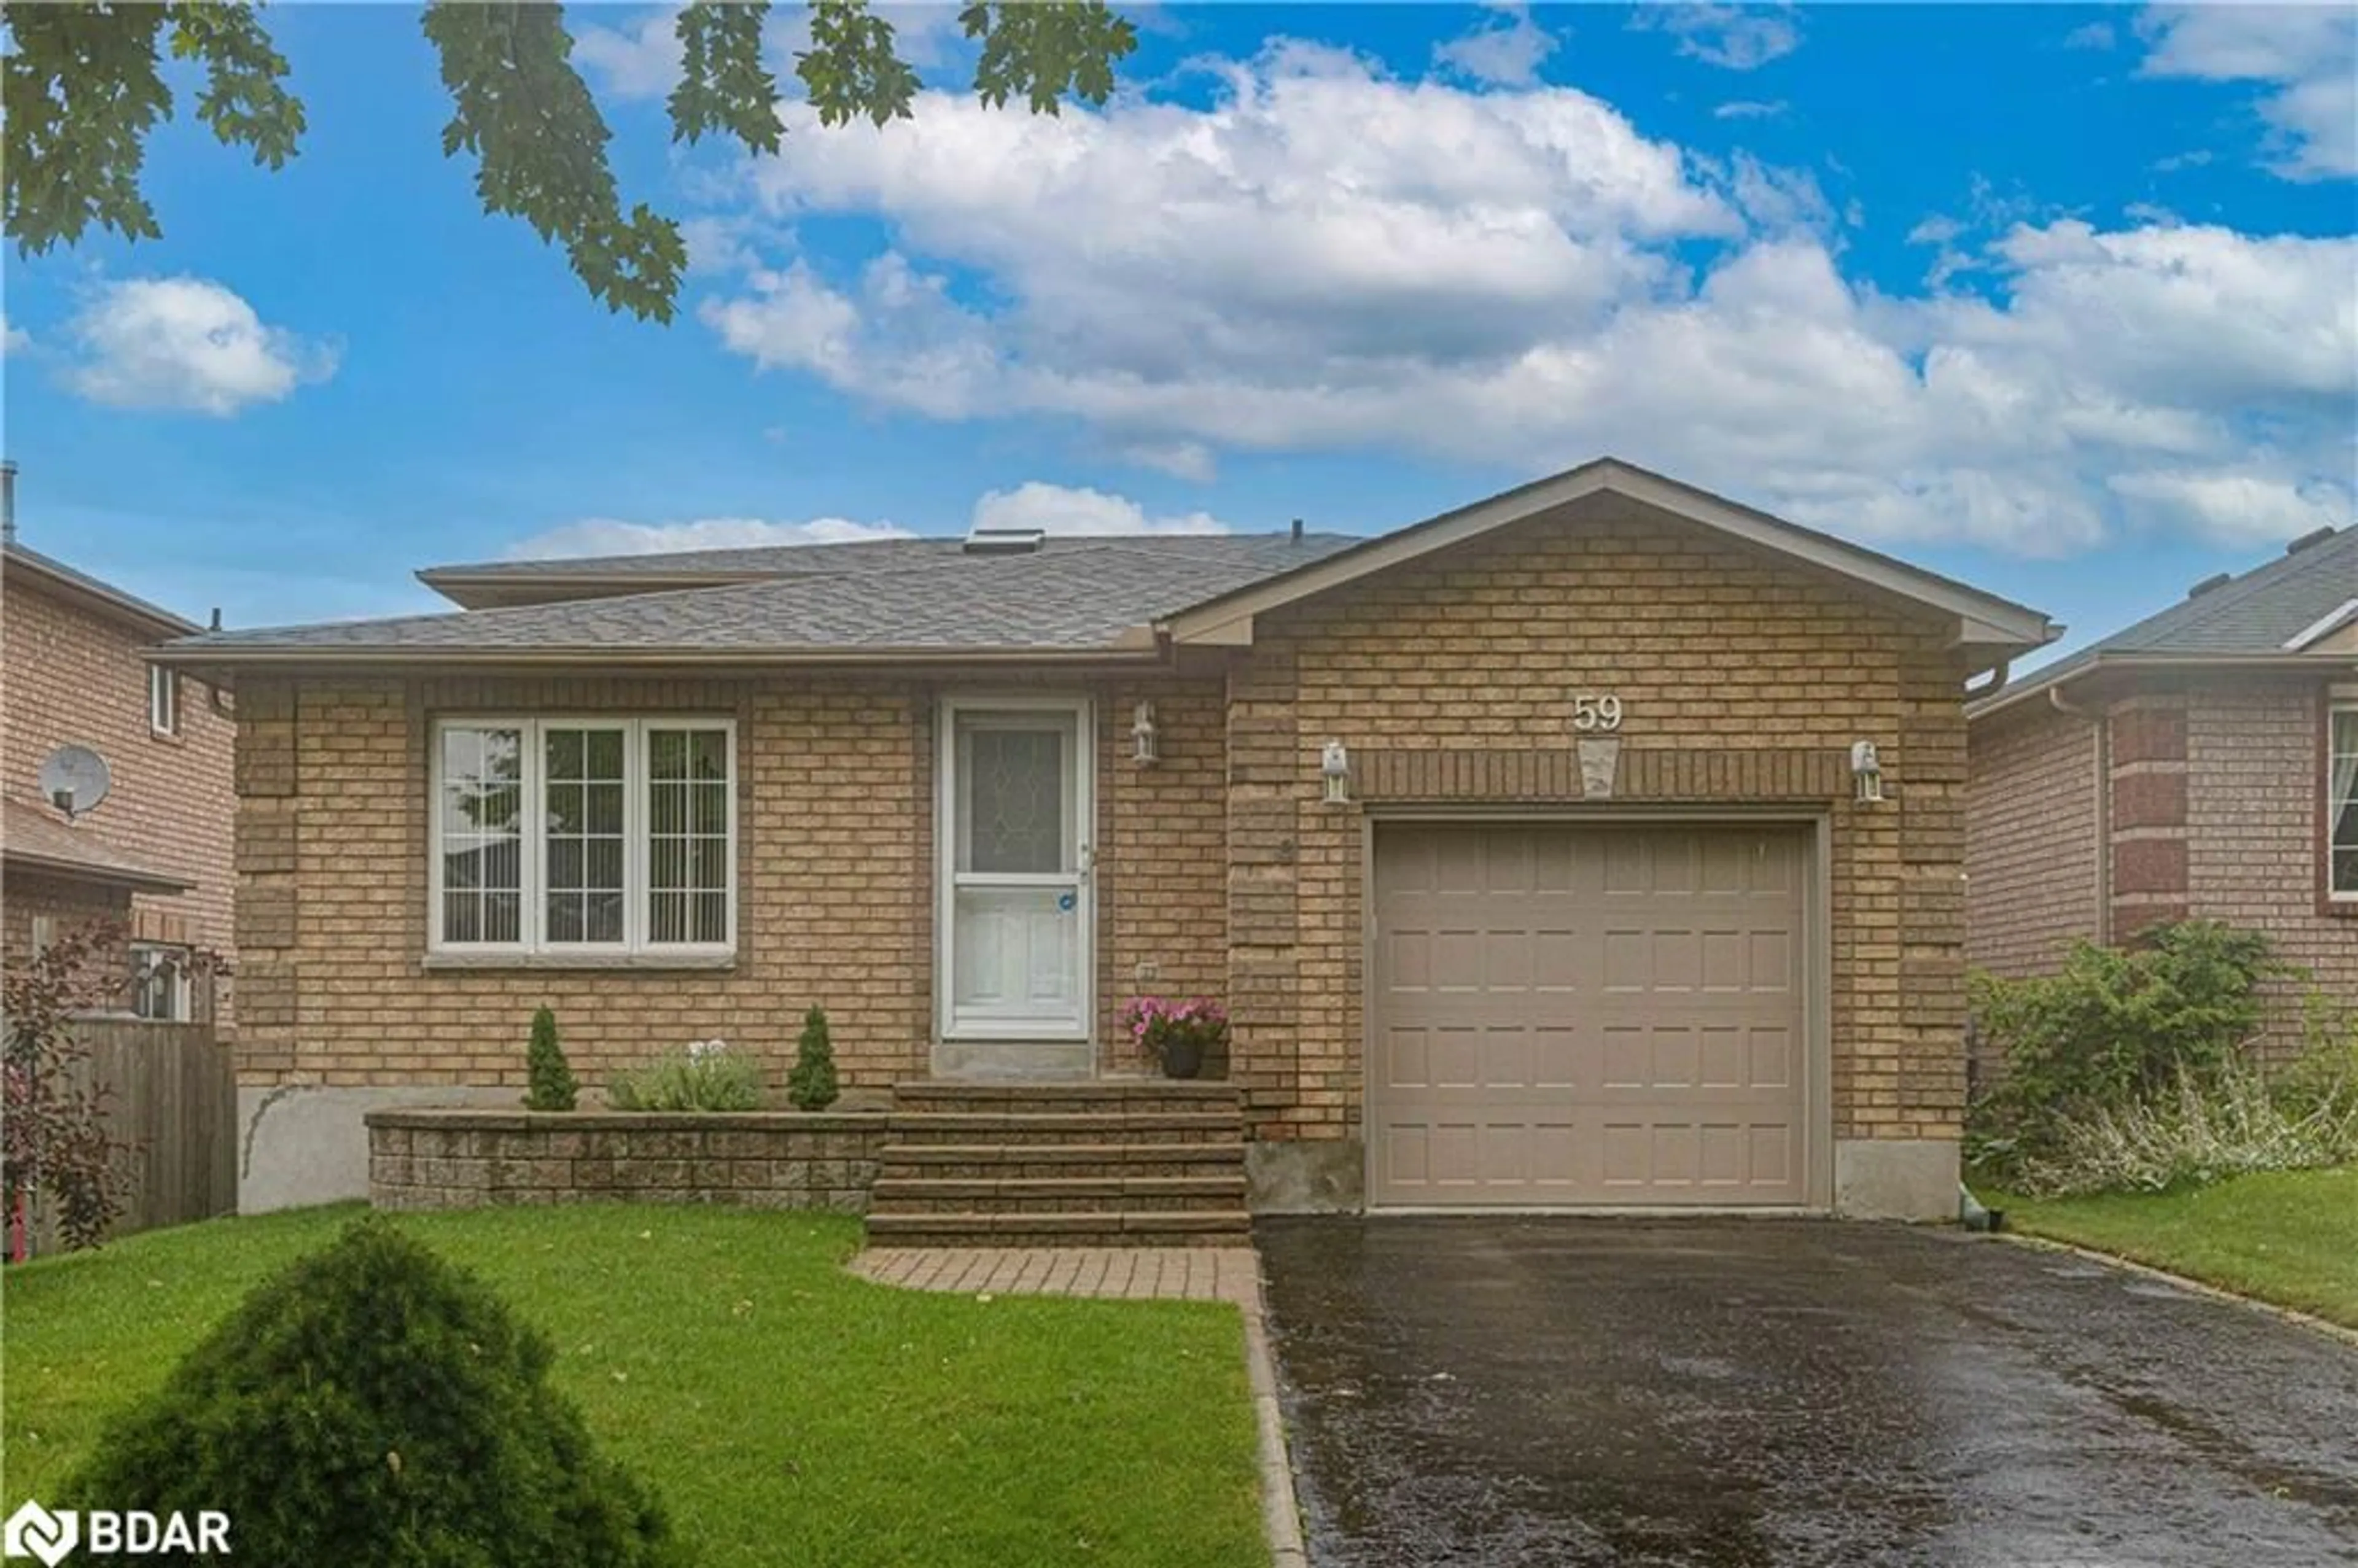 Home with brick exterior material for 59 Snowy Owl Cres, Barrie Ontario L4M 6P5